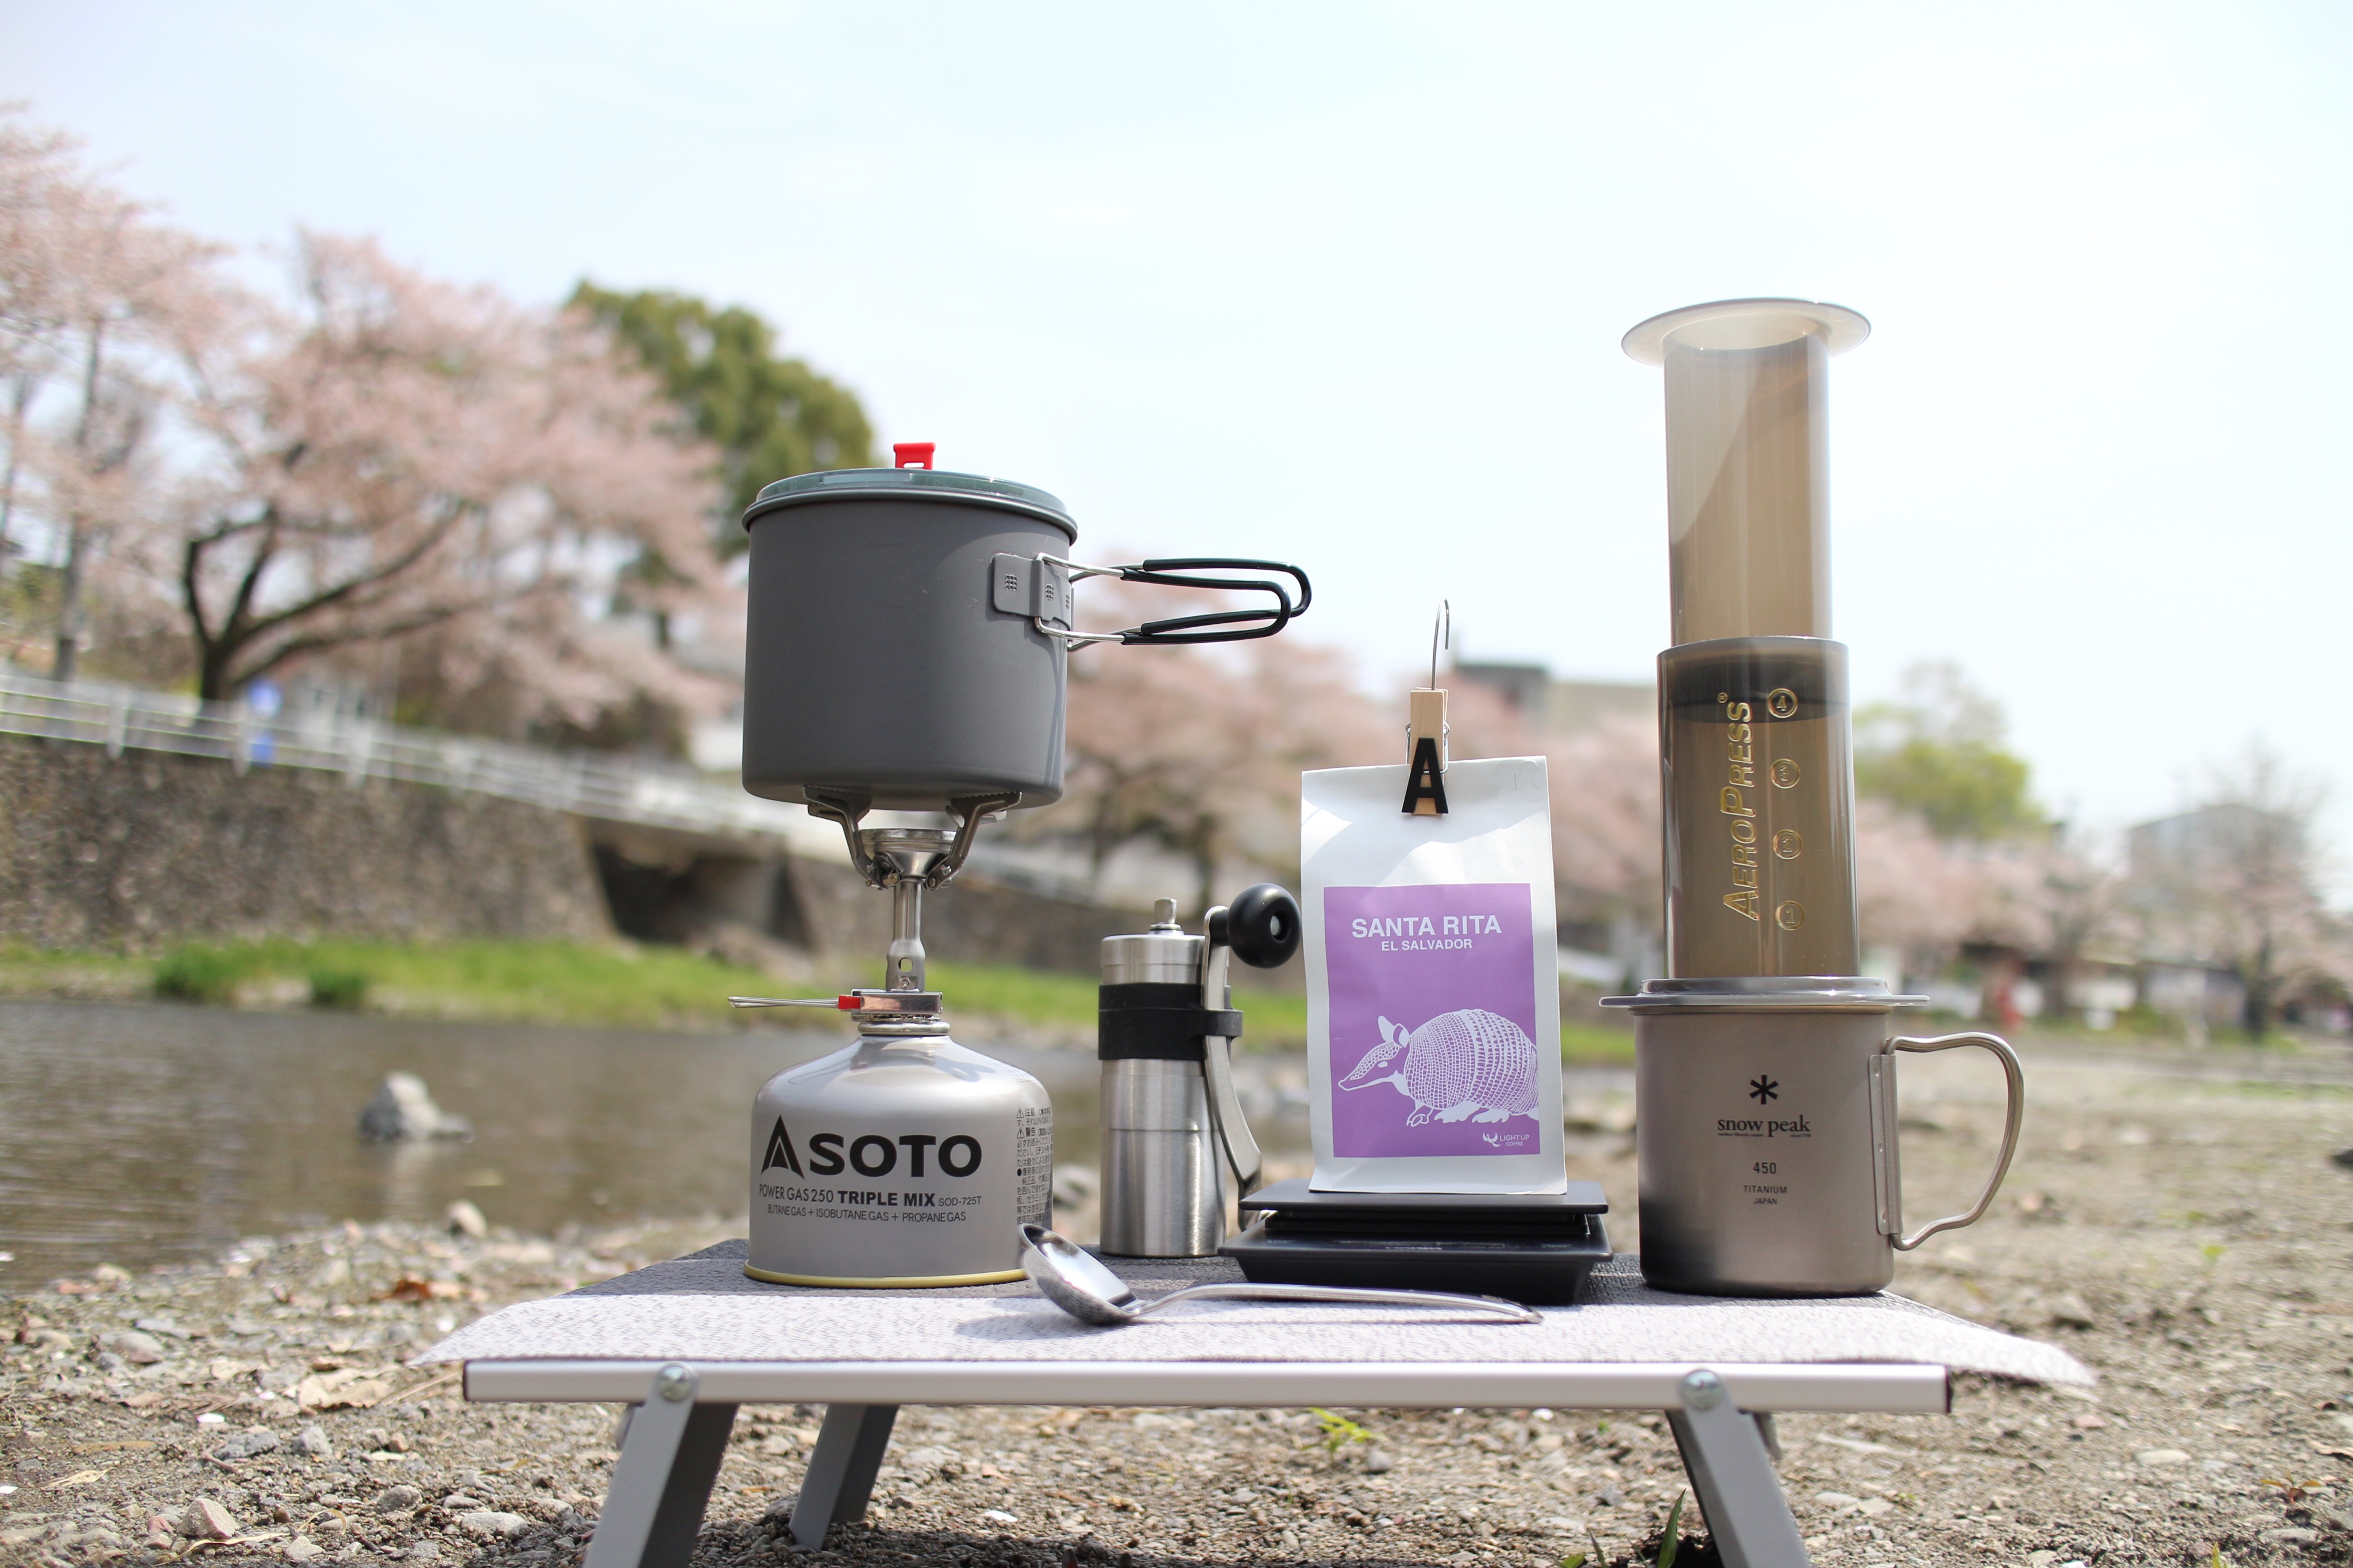 OUTDOOR COFFEE